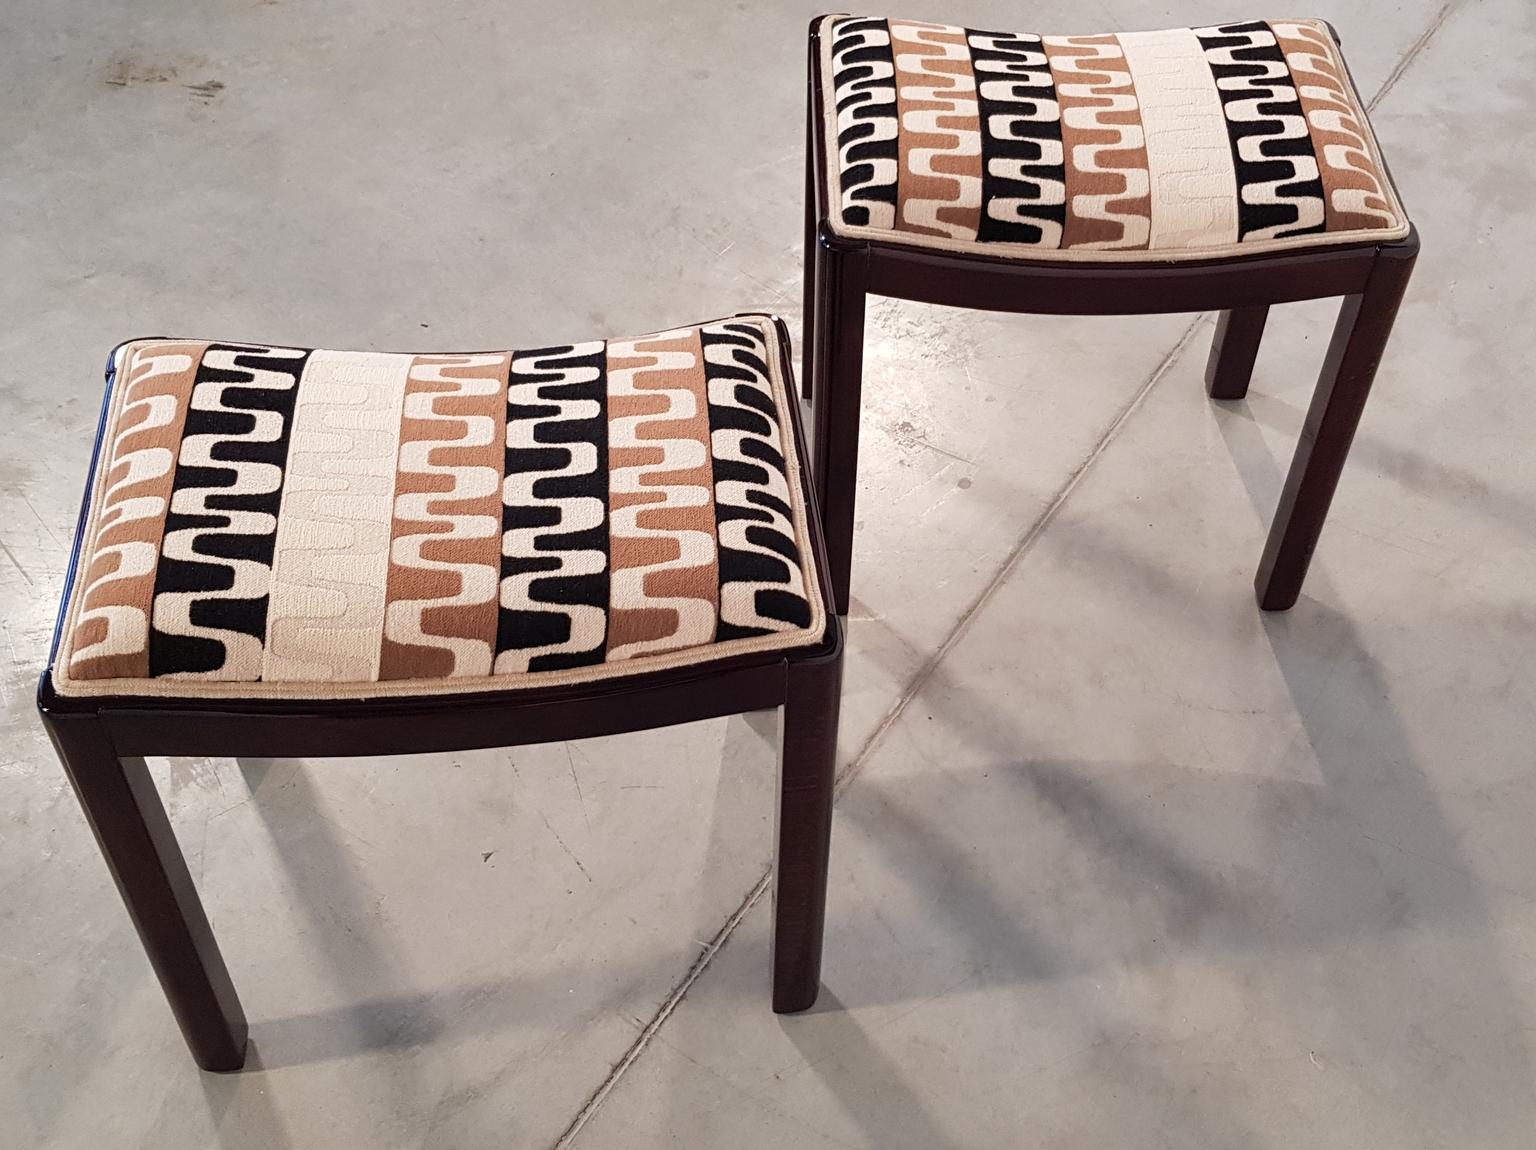 Textile Pair of Art Deco Walnut Upholstered Stools, 1930s, Hungary For Sale